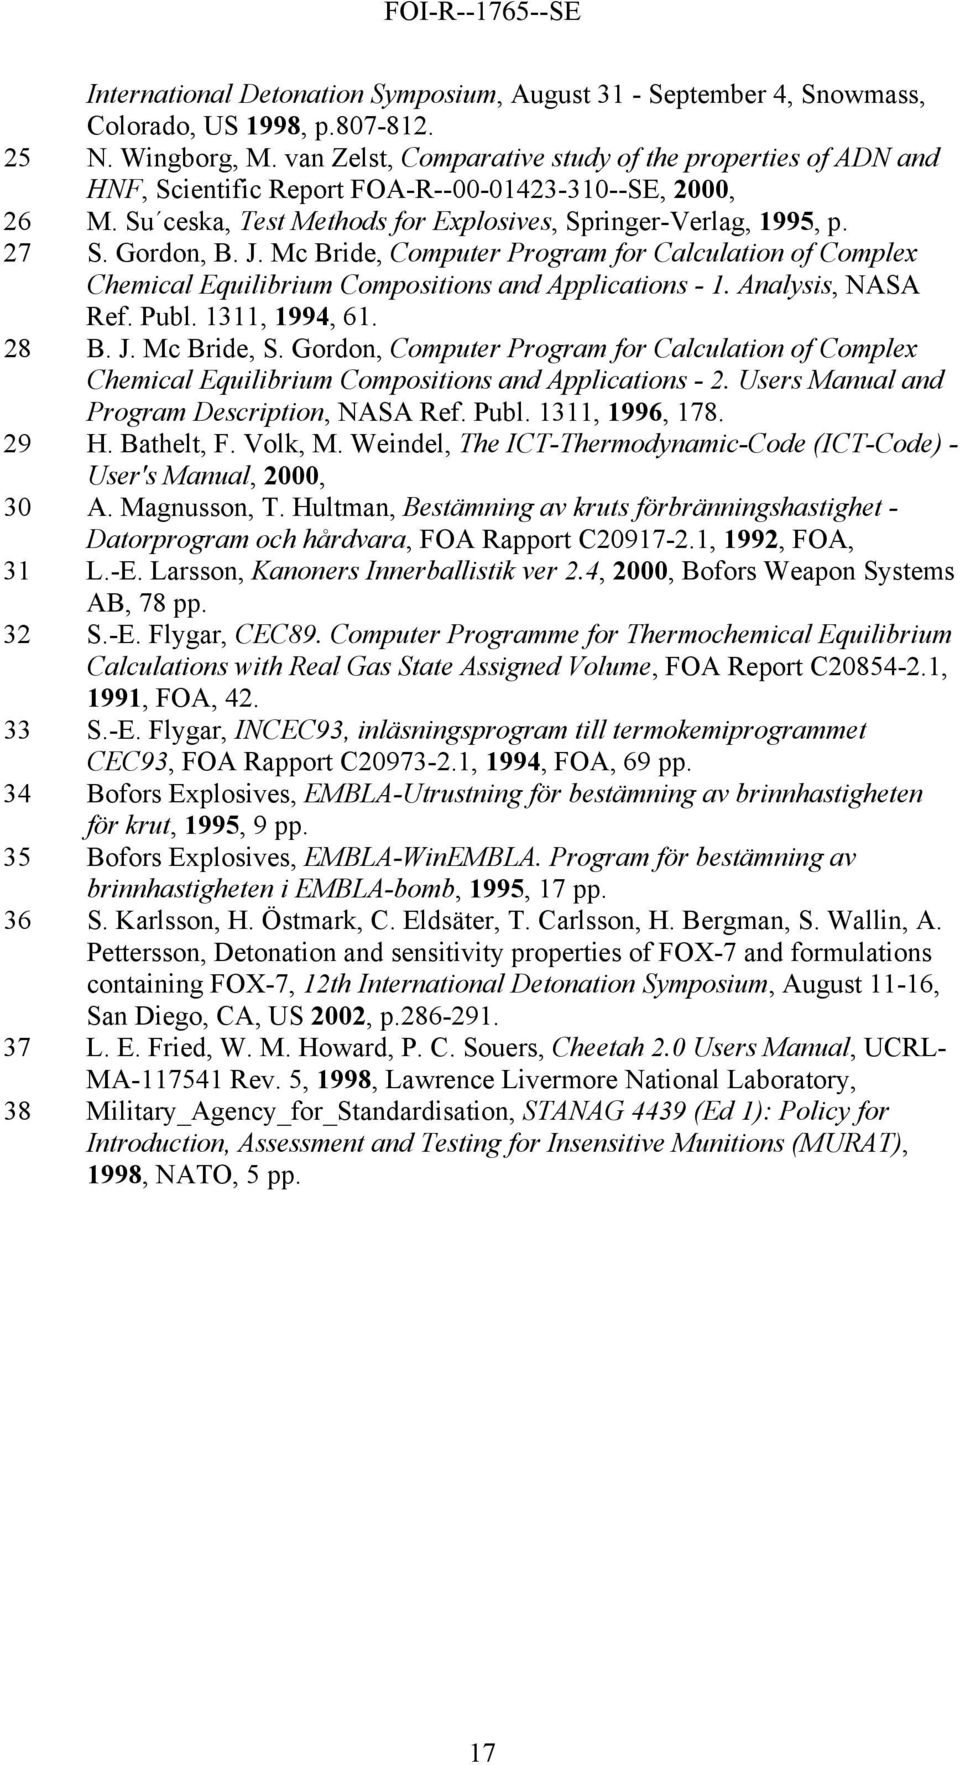 J. Mc Bride, Computer Program for Calculation of Complex Chemical Equilibrium Compositions and Applications - 1. Analysis, NASA Ref. Publ. 1311, 1994, 61. 28 B. J. Mc Bride, S.